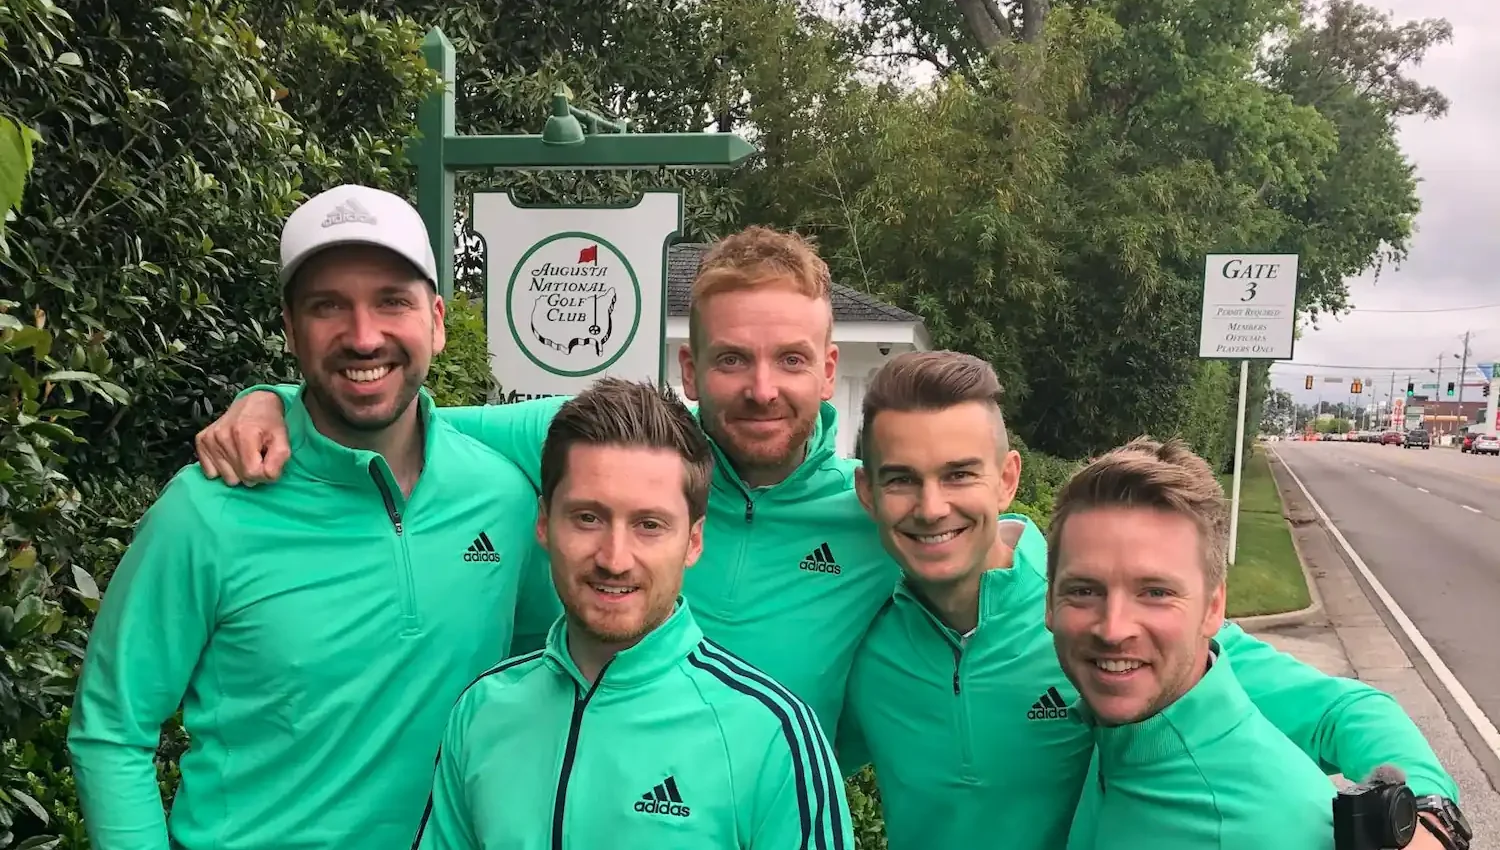 Piers Ward and Andy Proudman, along with two others, in green shirts posing for a picture at Augusta National Golf Course during the 2018 Masters.